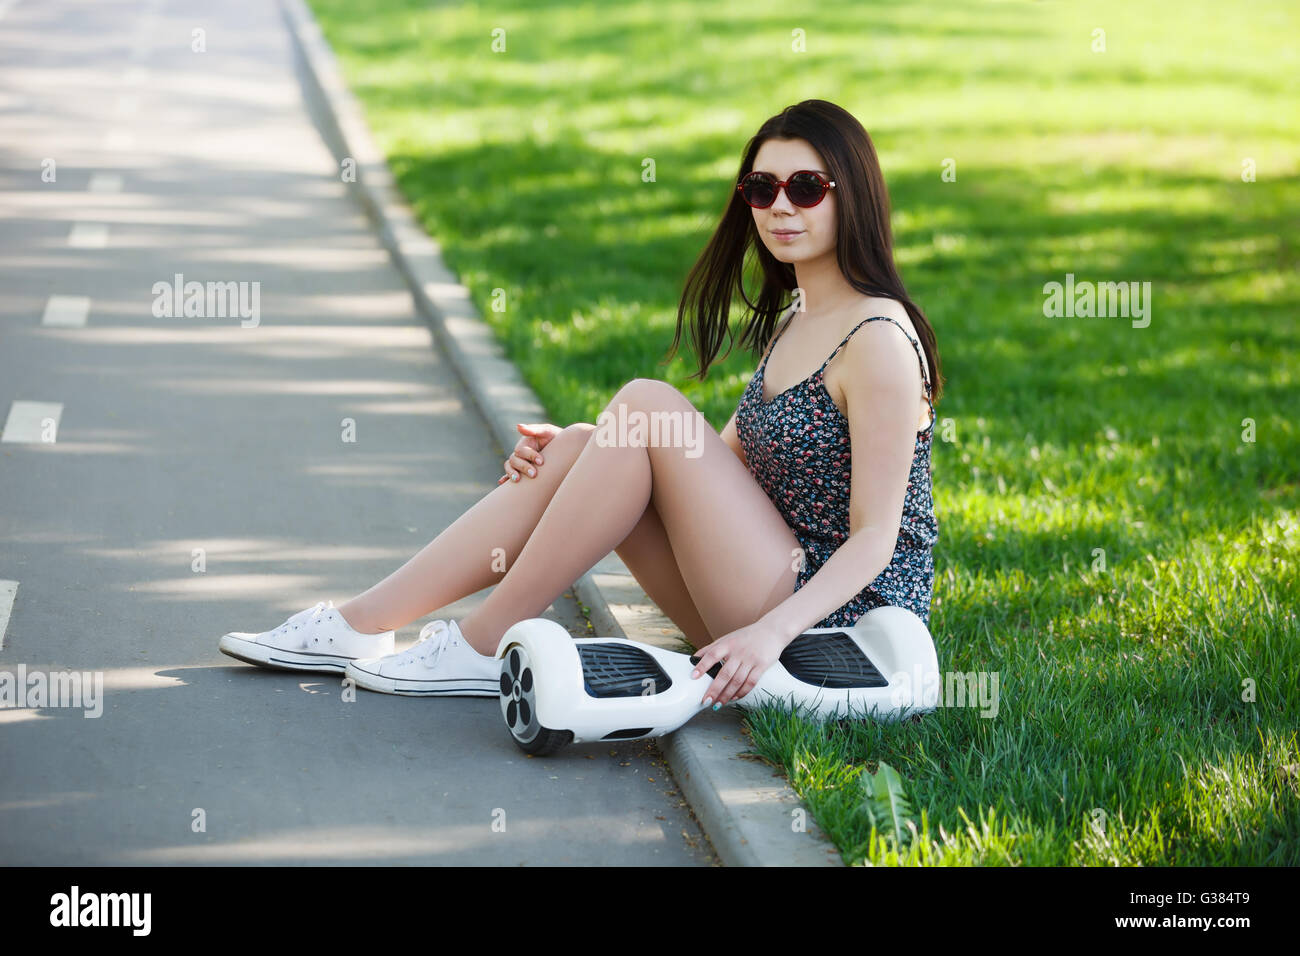 Young brunette girl riding electric mini hover board scooter in green park. Good summer weather, ecological eurban transportation technology and pretty model Stock Photo